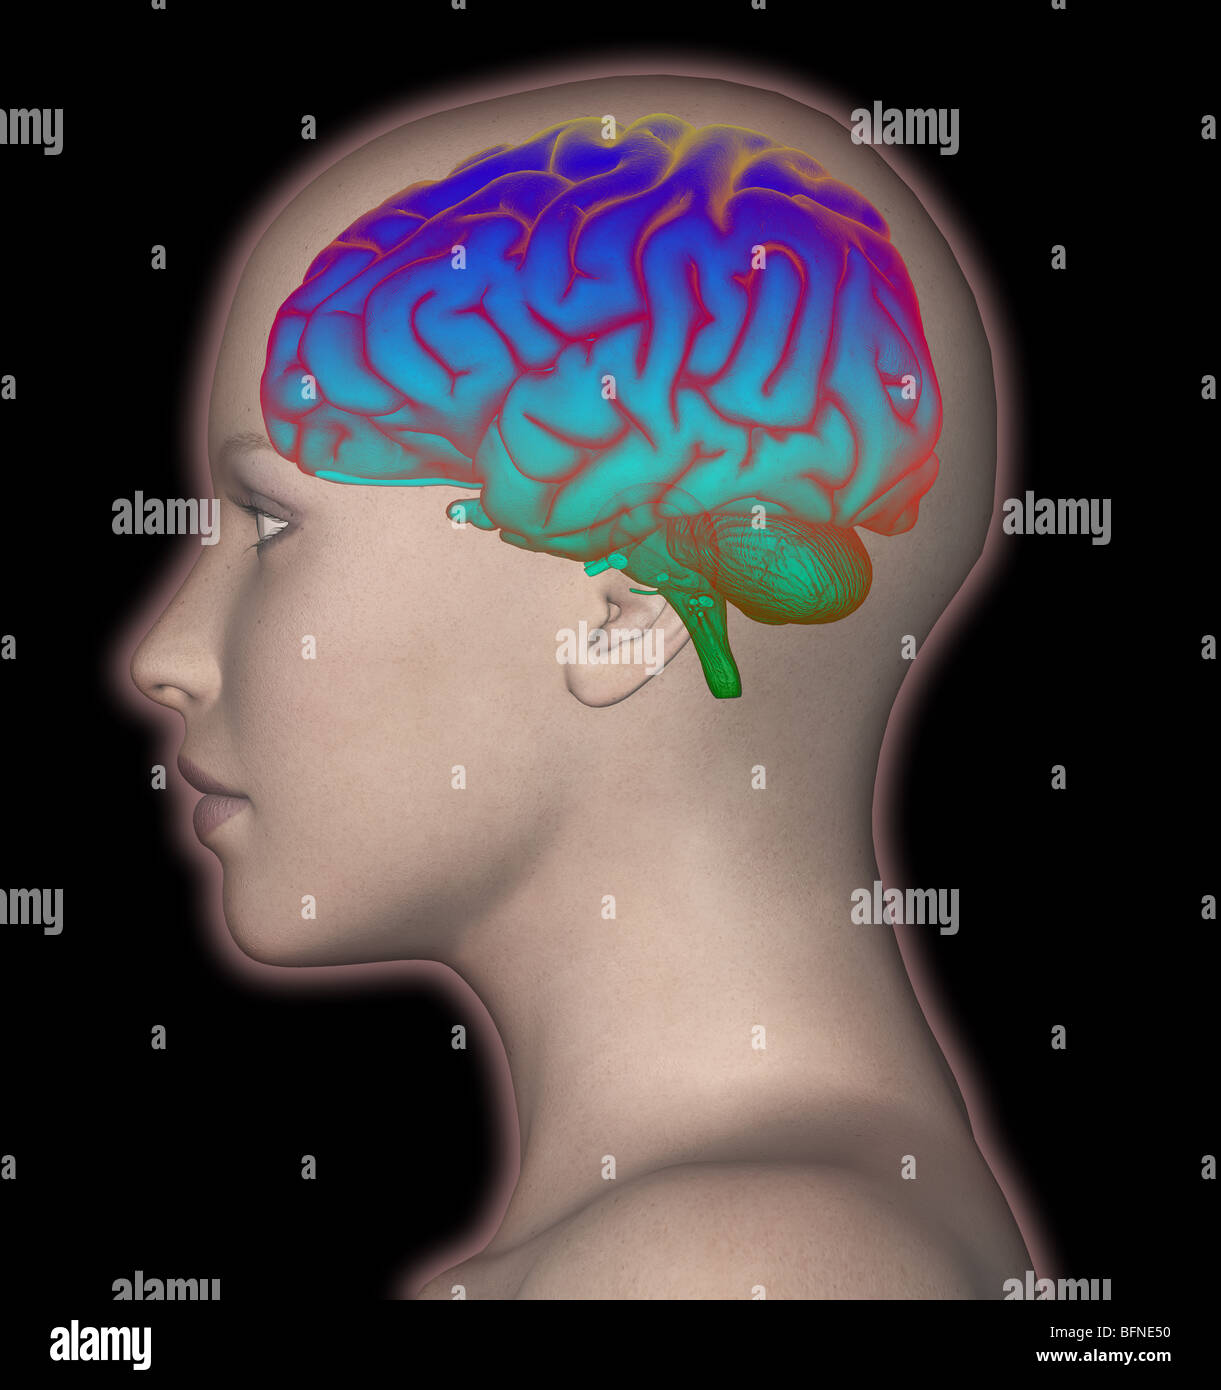 Illustration of the human brain shown in lateral view superimposed on a female head Stock Photo